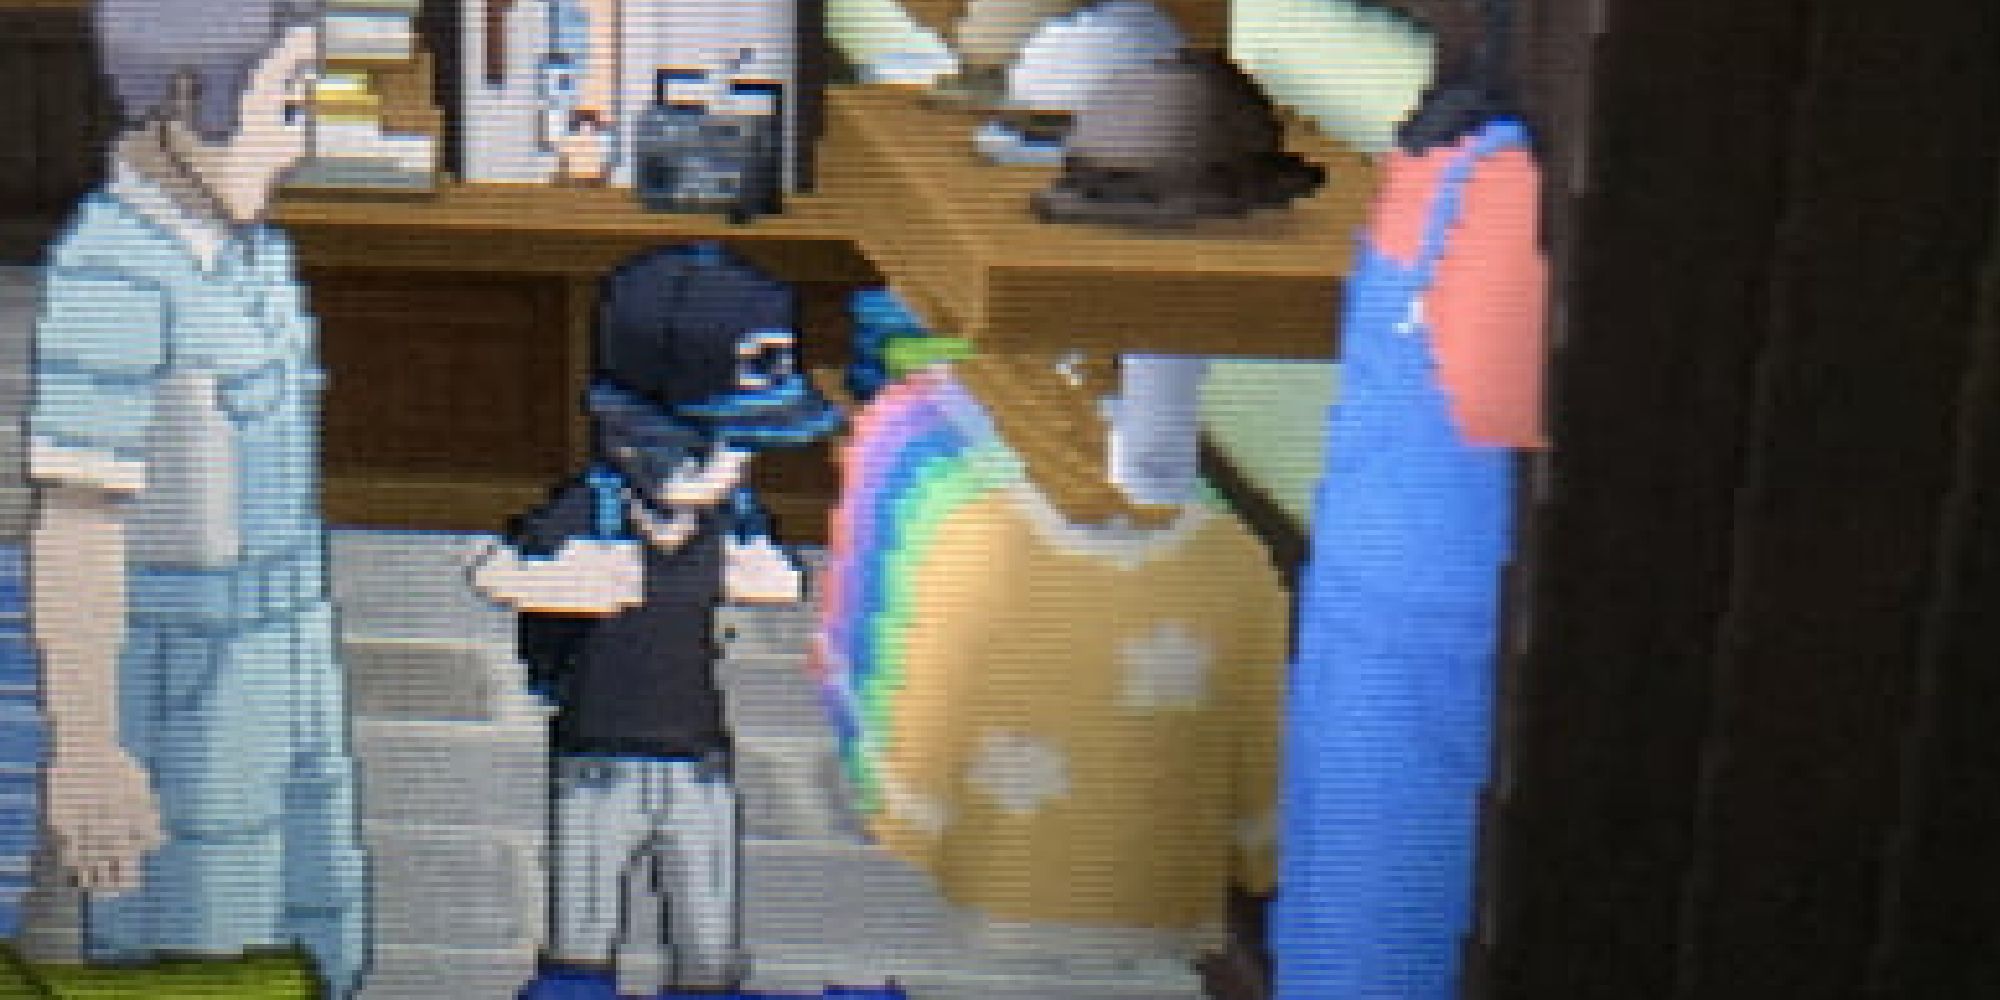 A player standing next to Mario's red shirt and overalls in a boutique shop in Pokemon Sun & Moon